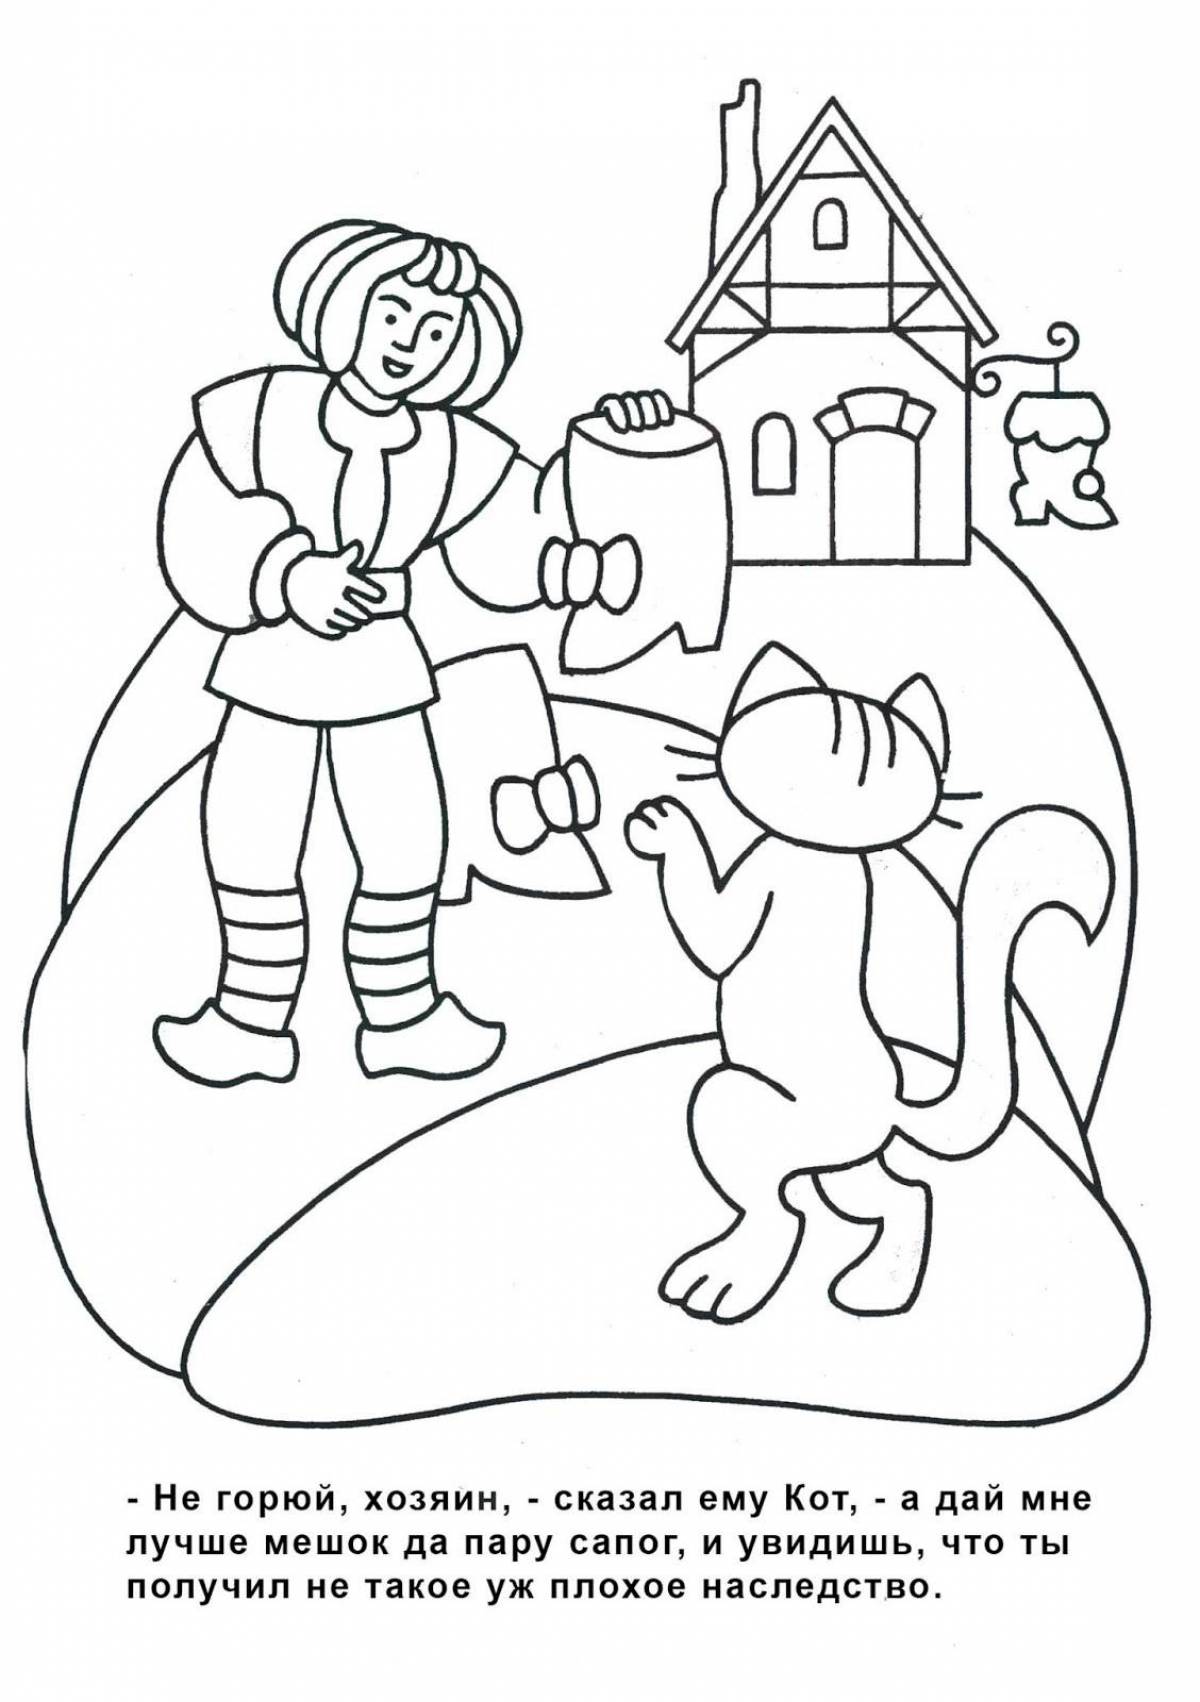 Charles Perrault's funny coloring book